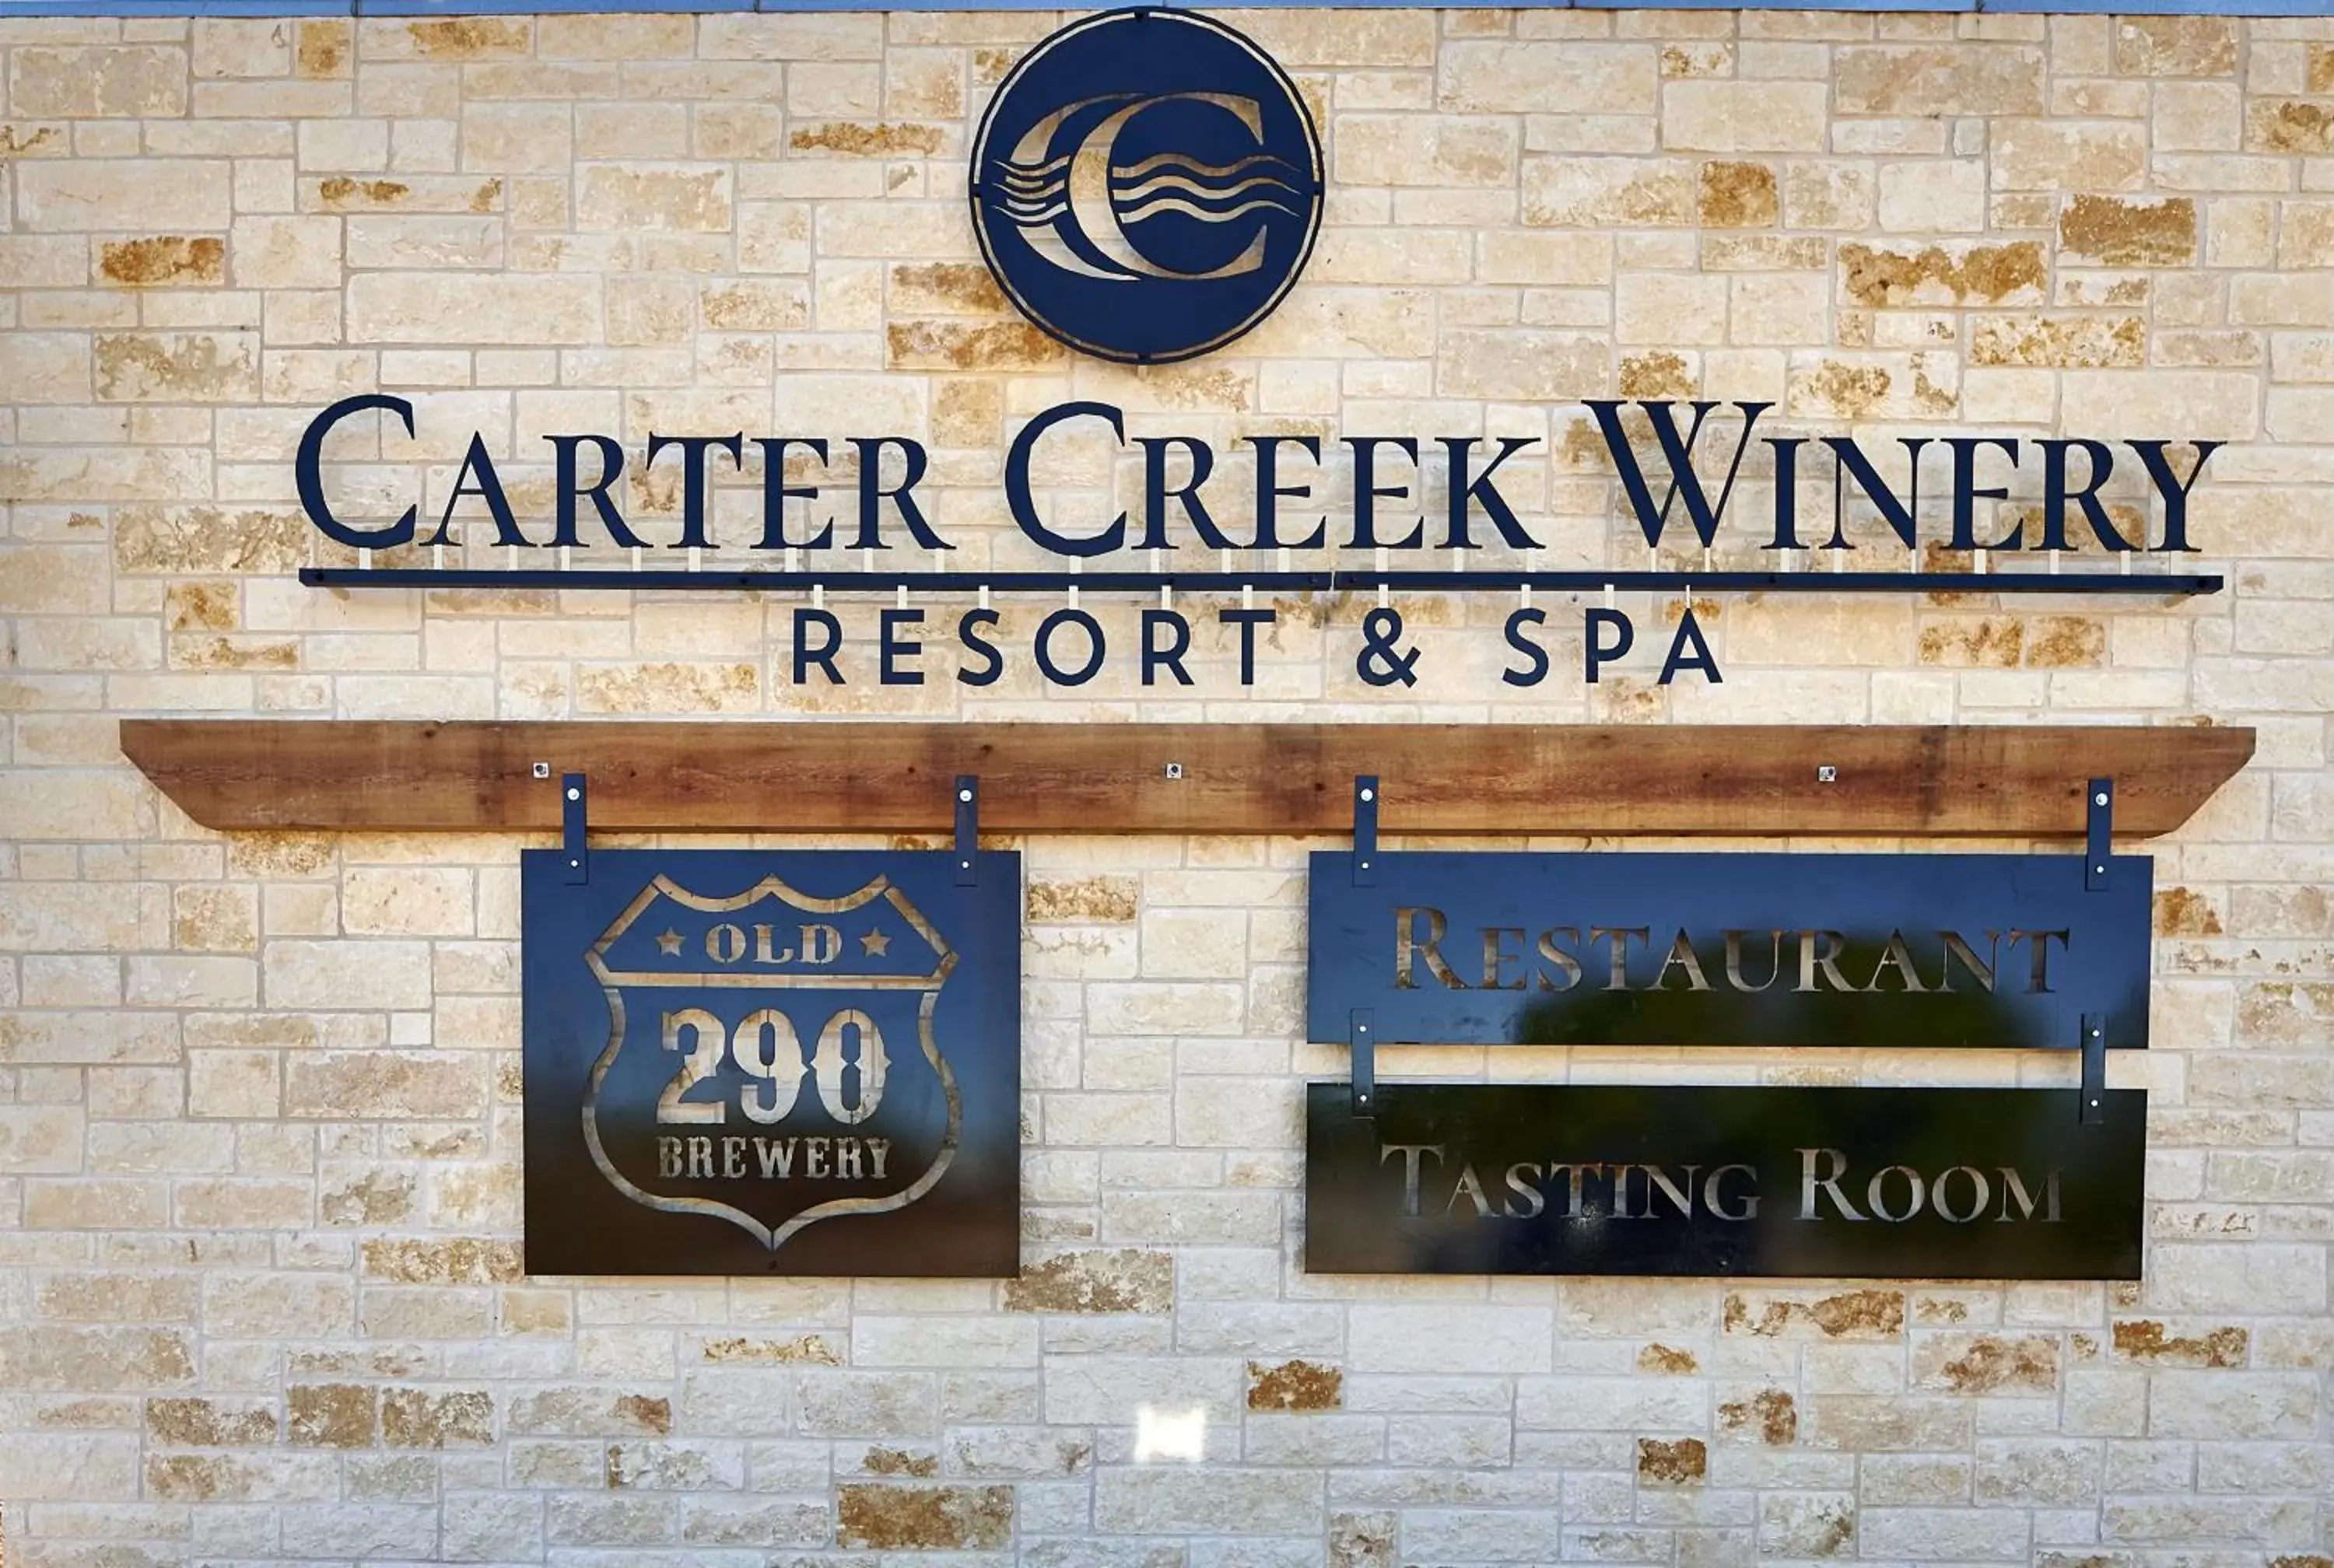 Property logo or sign in Carter Creek Winery Resort & Spa